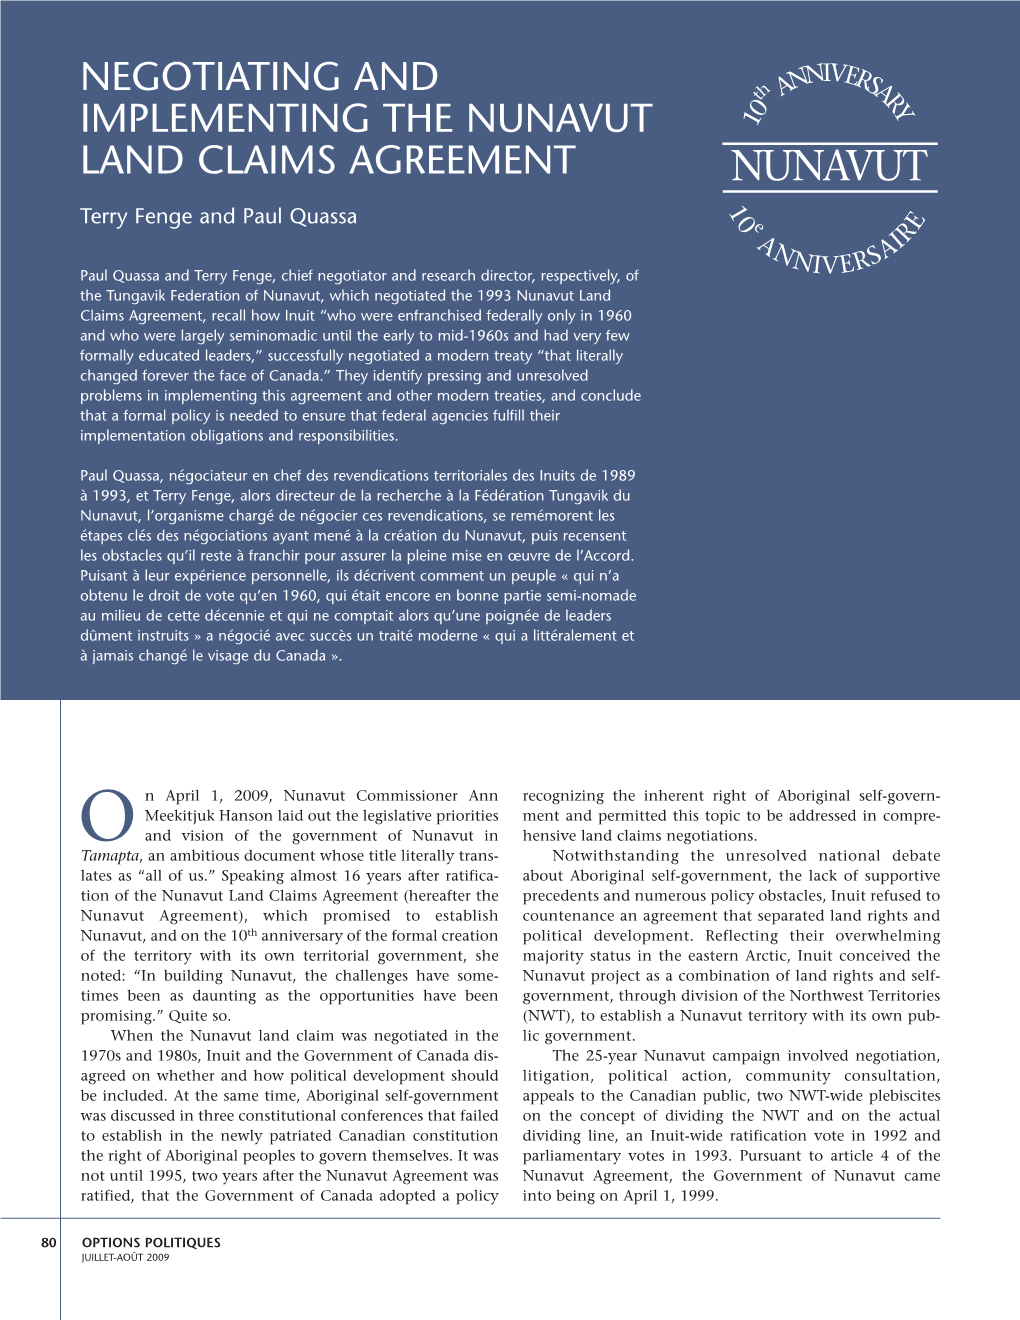 Negotiating and Implementing the Nunavut Land Claims Agreement